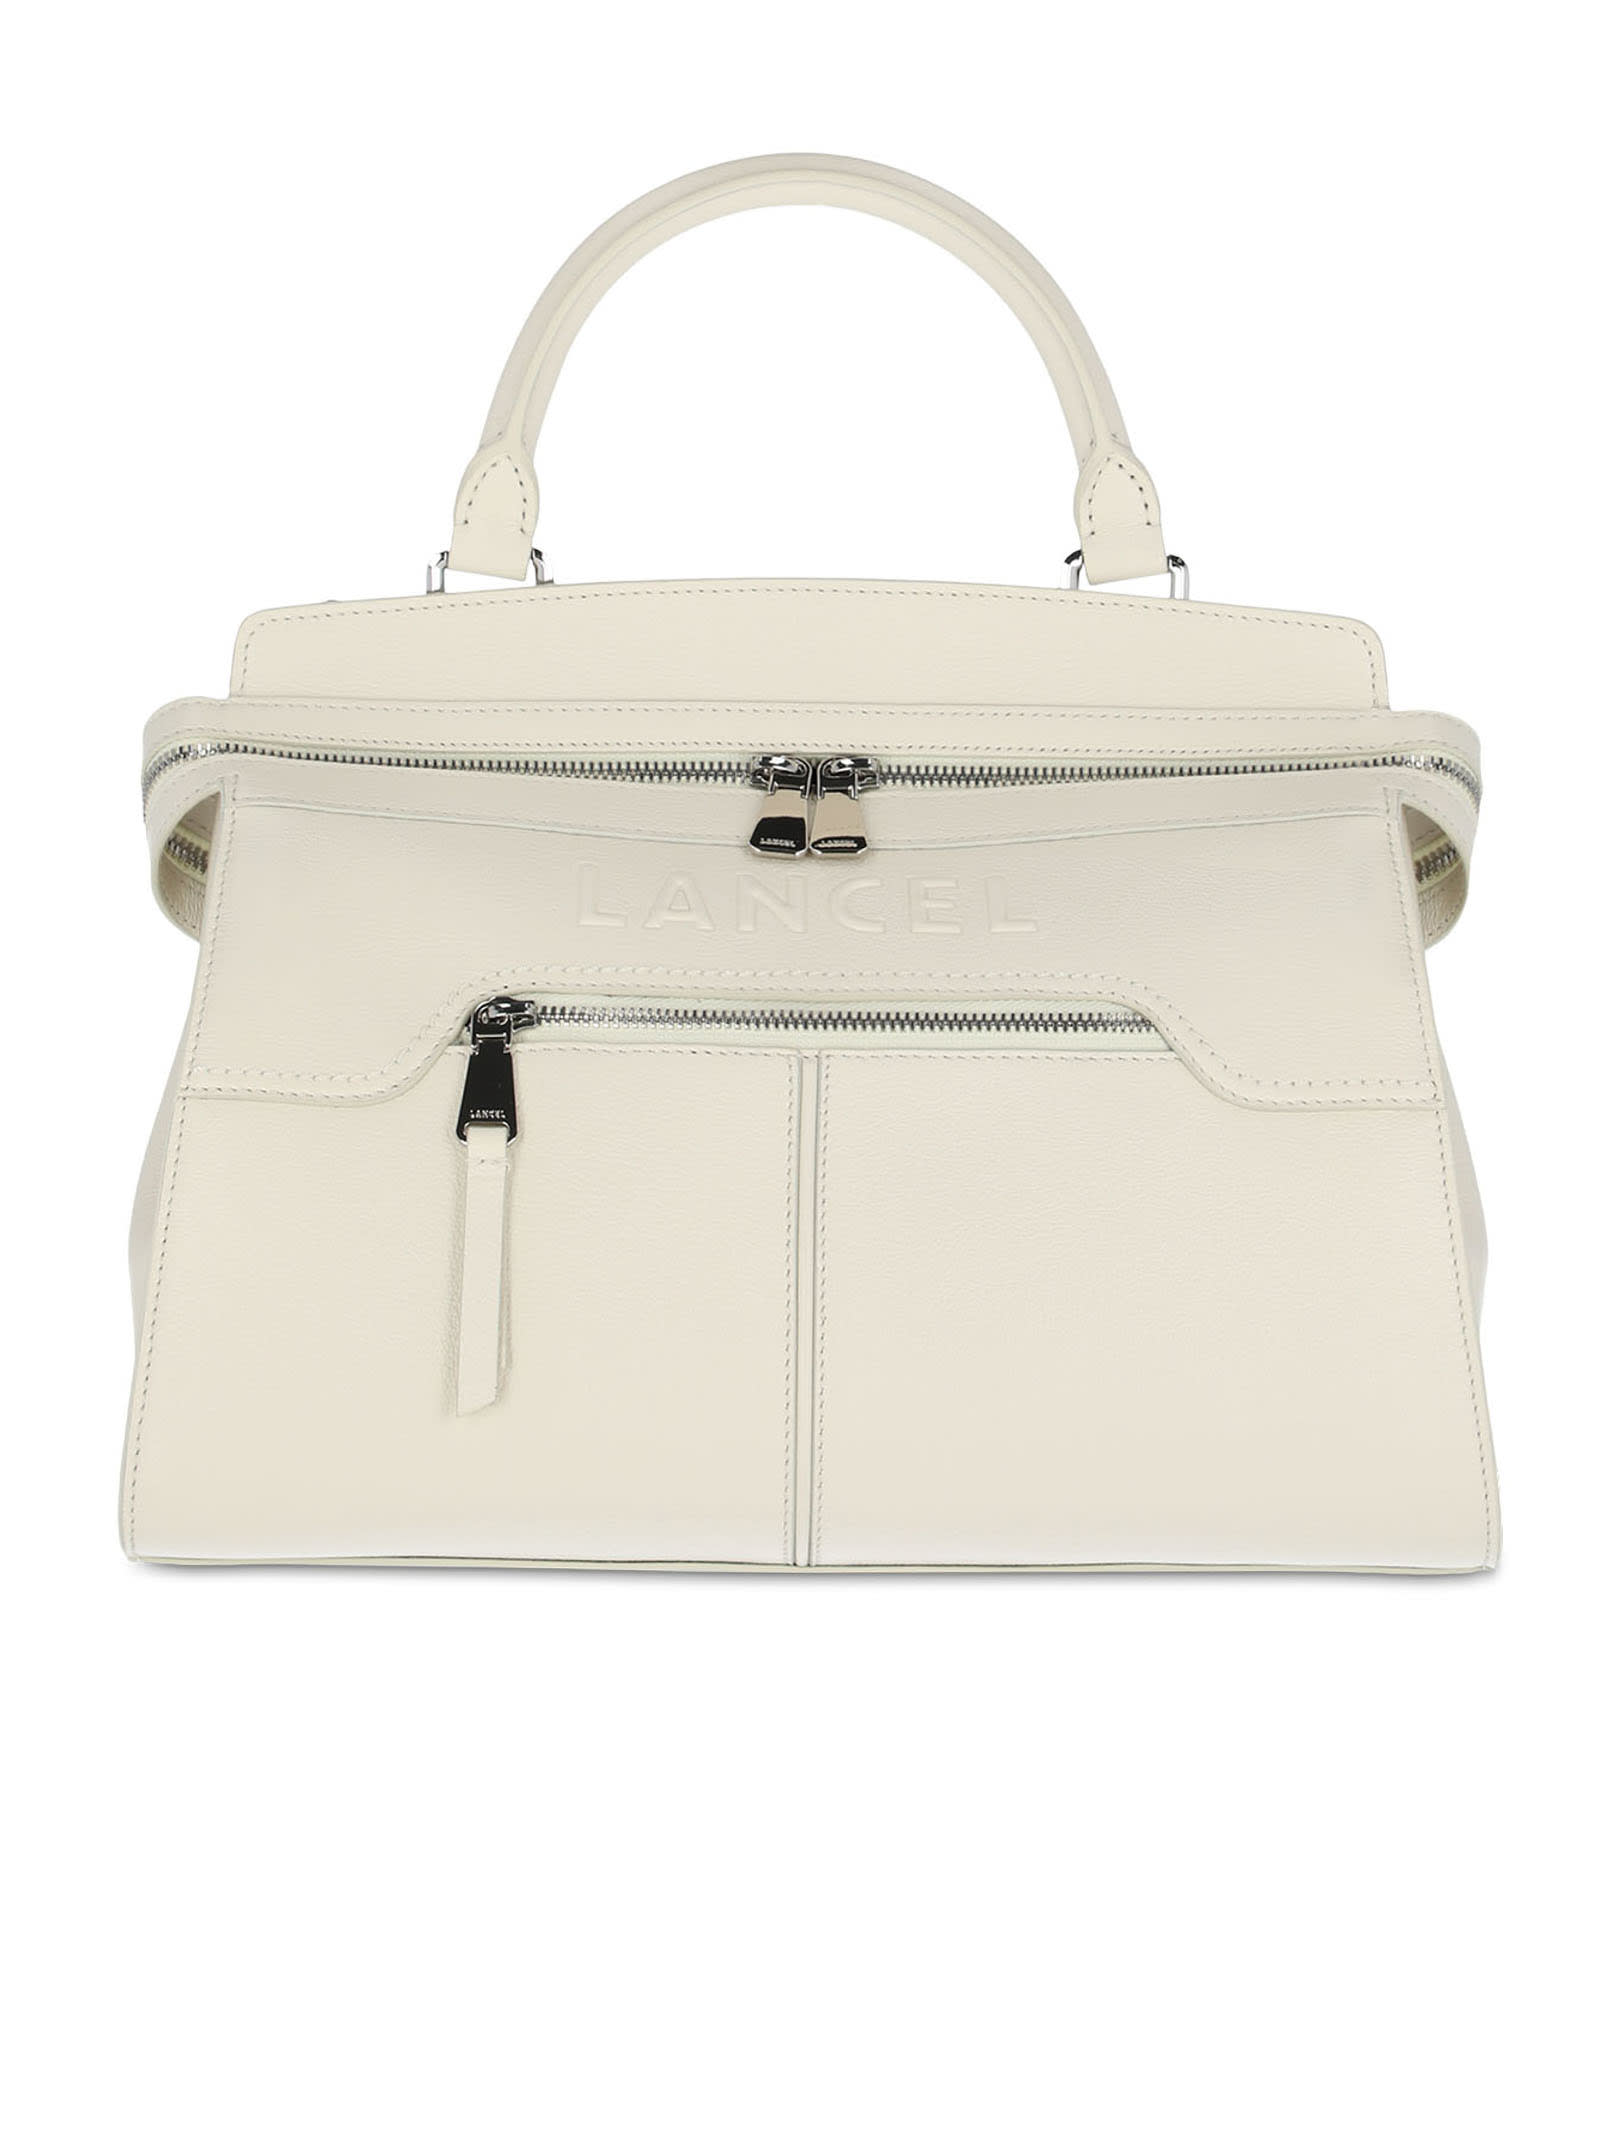 Lancel White Grained Cowhide Leather Bag